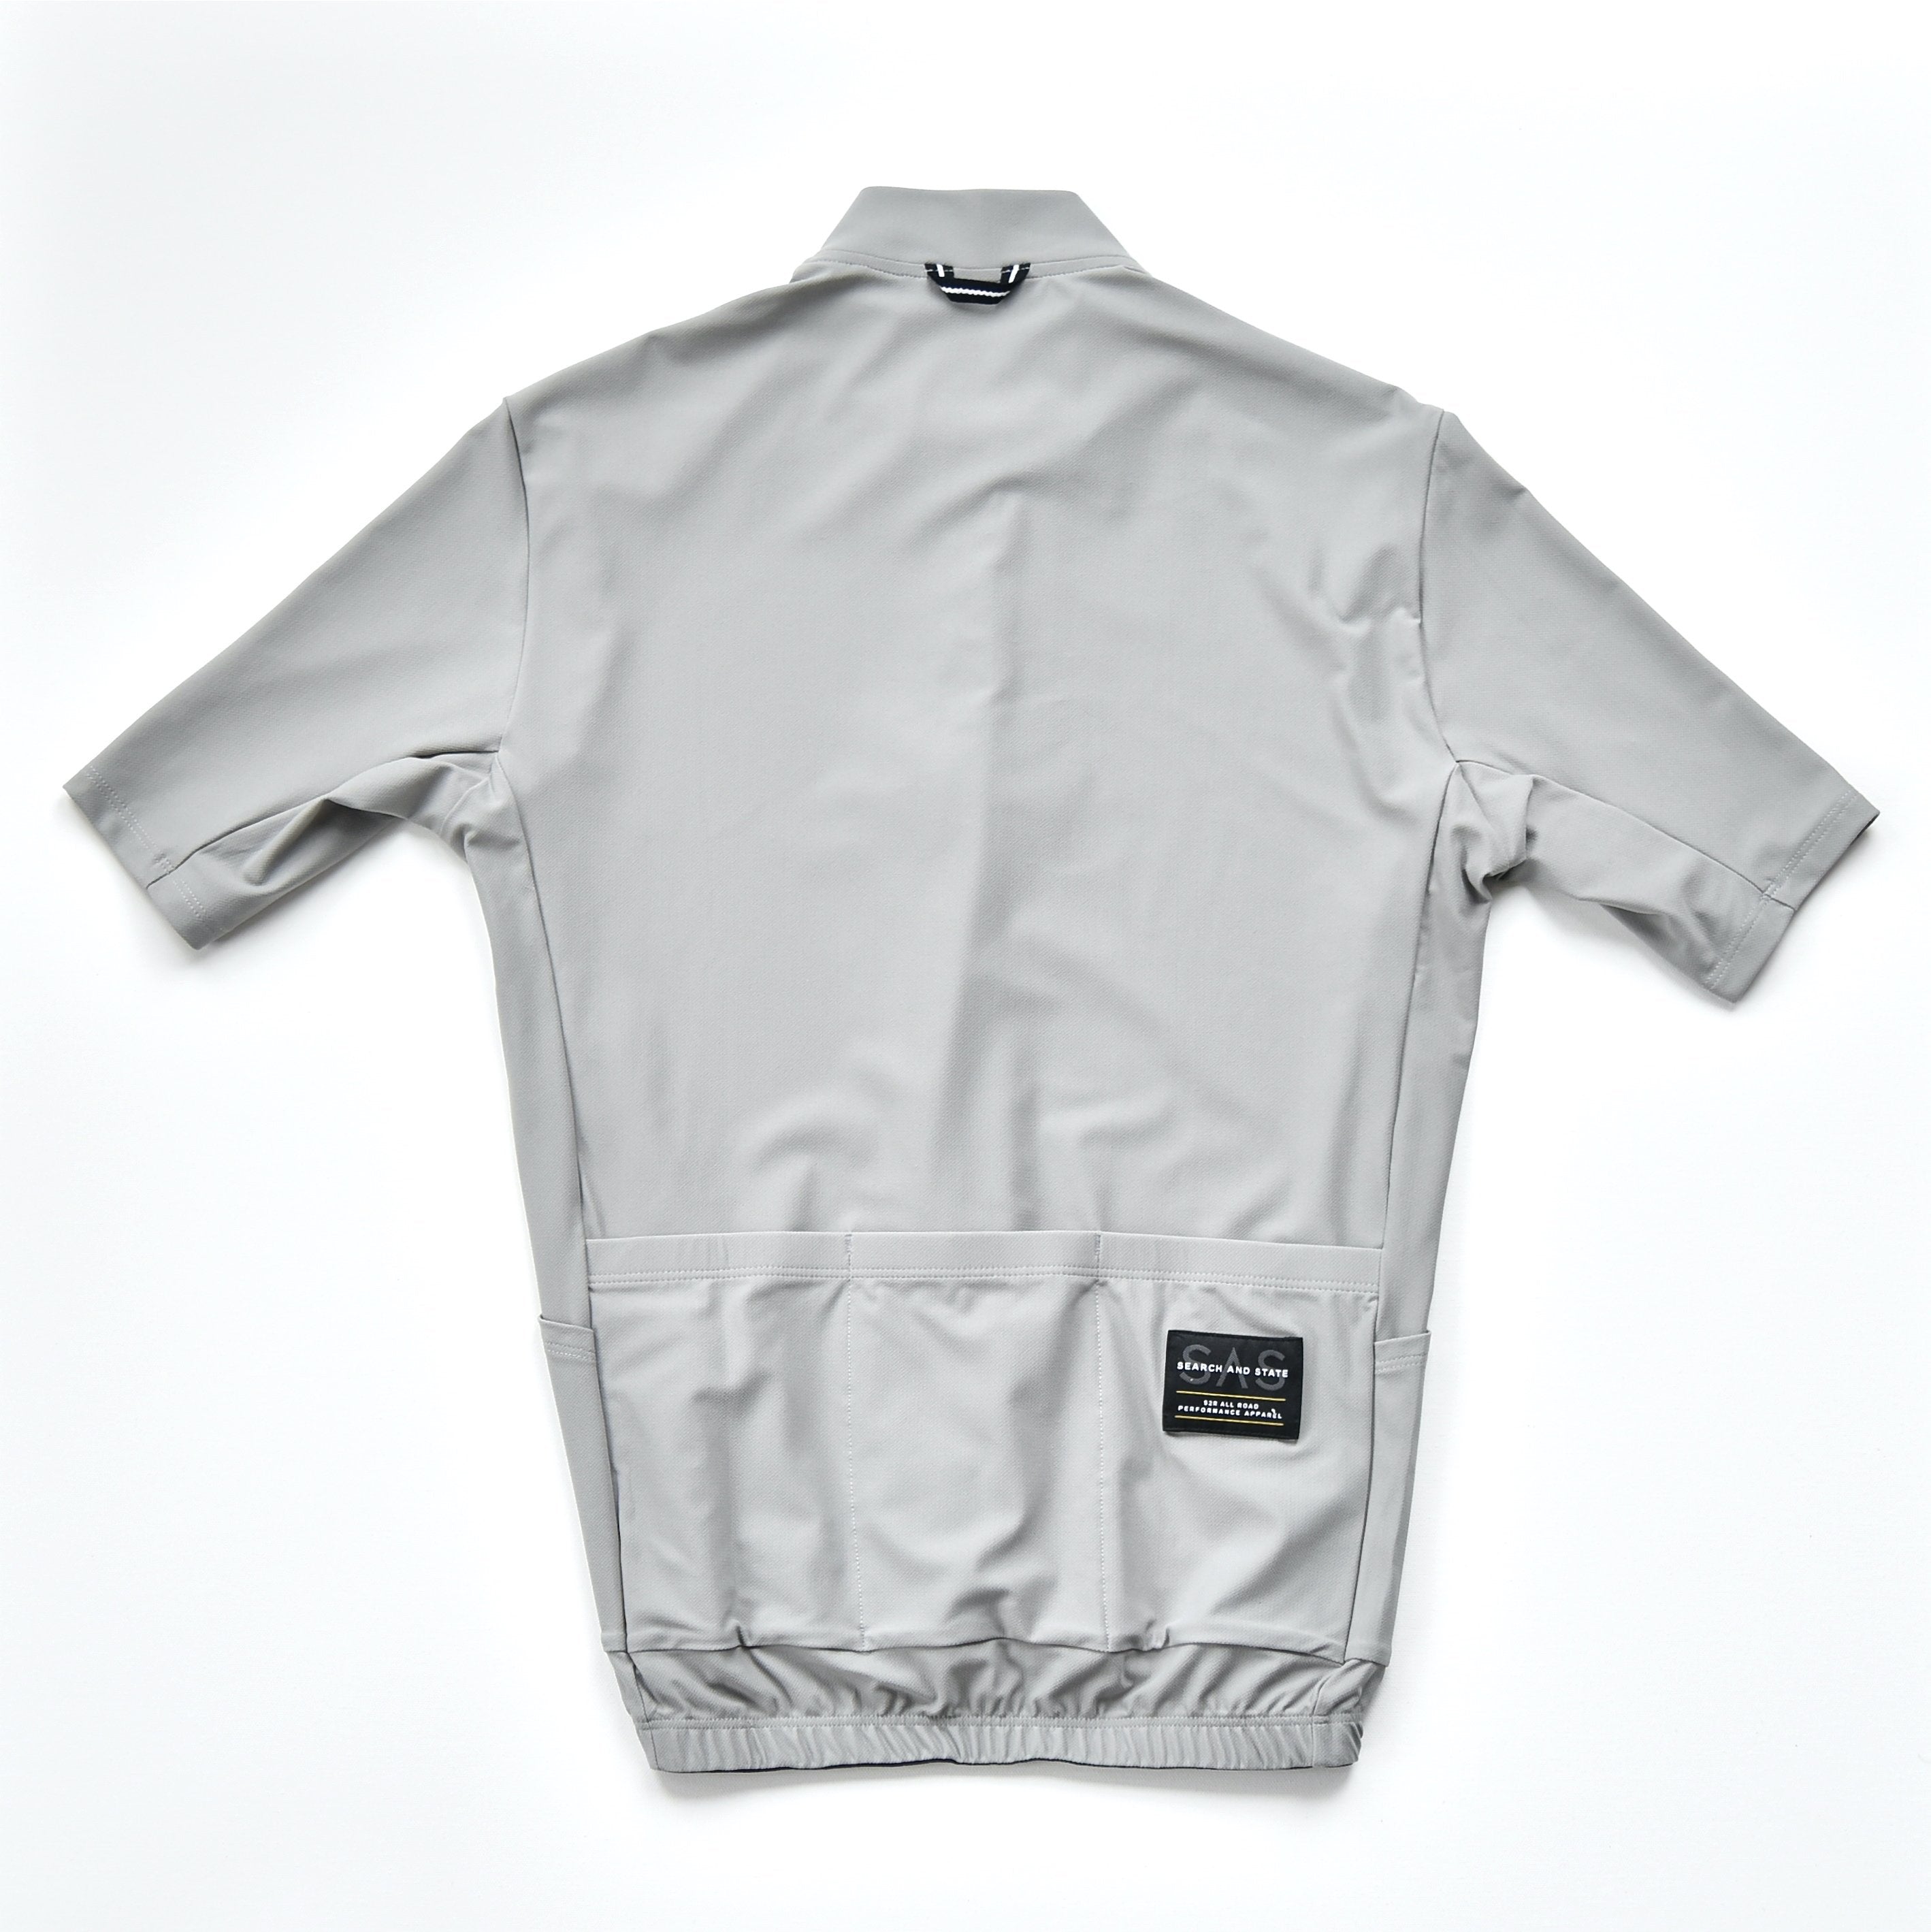 SEARCH AND STATE S2-R Performance Jersey